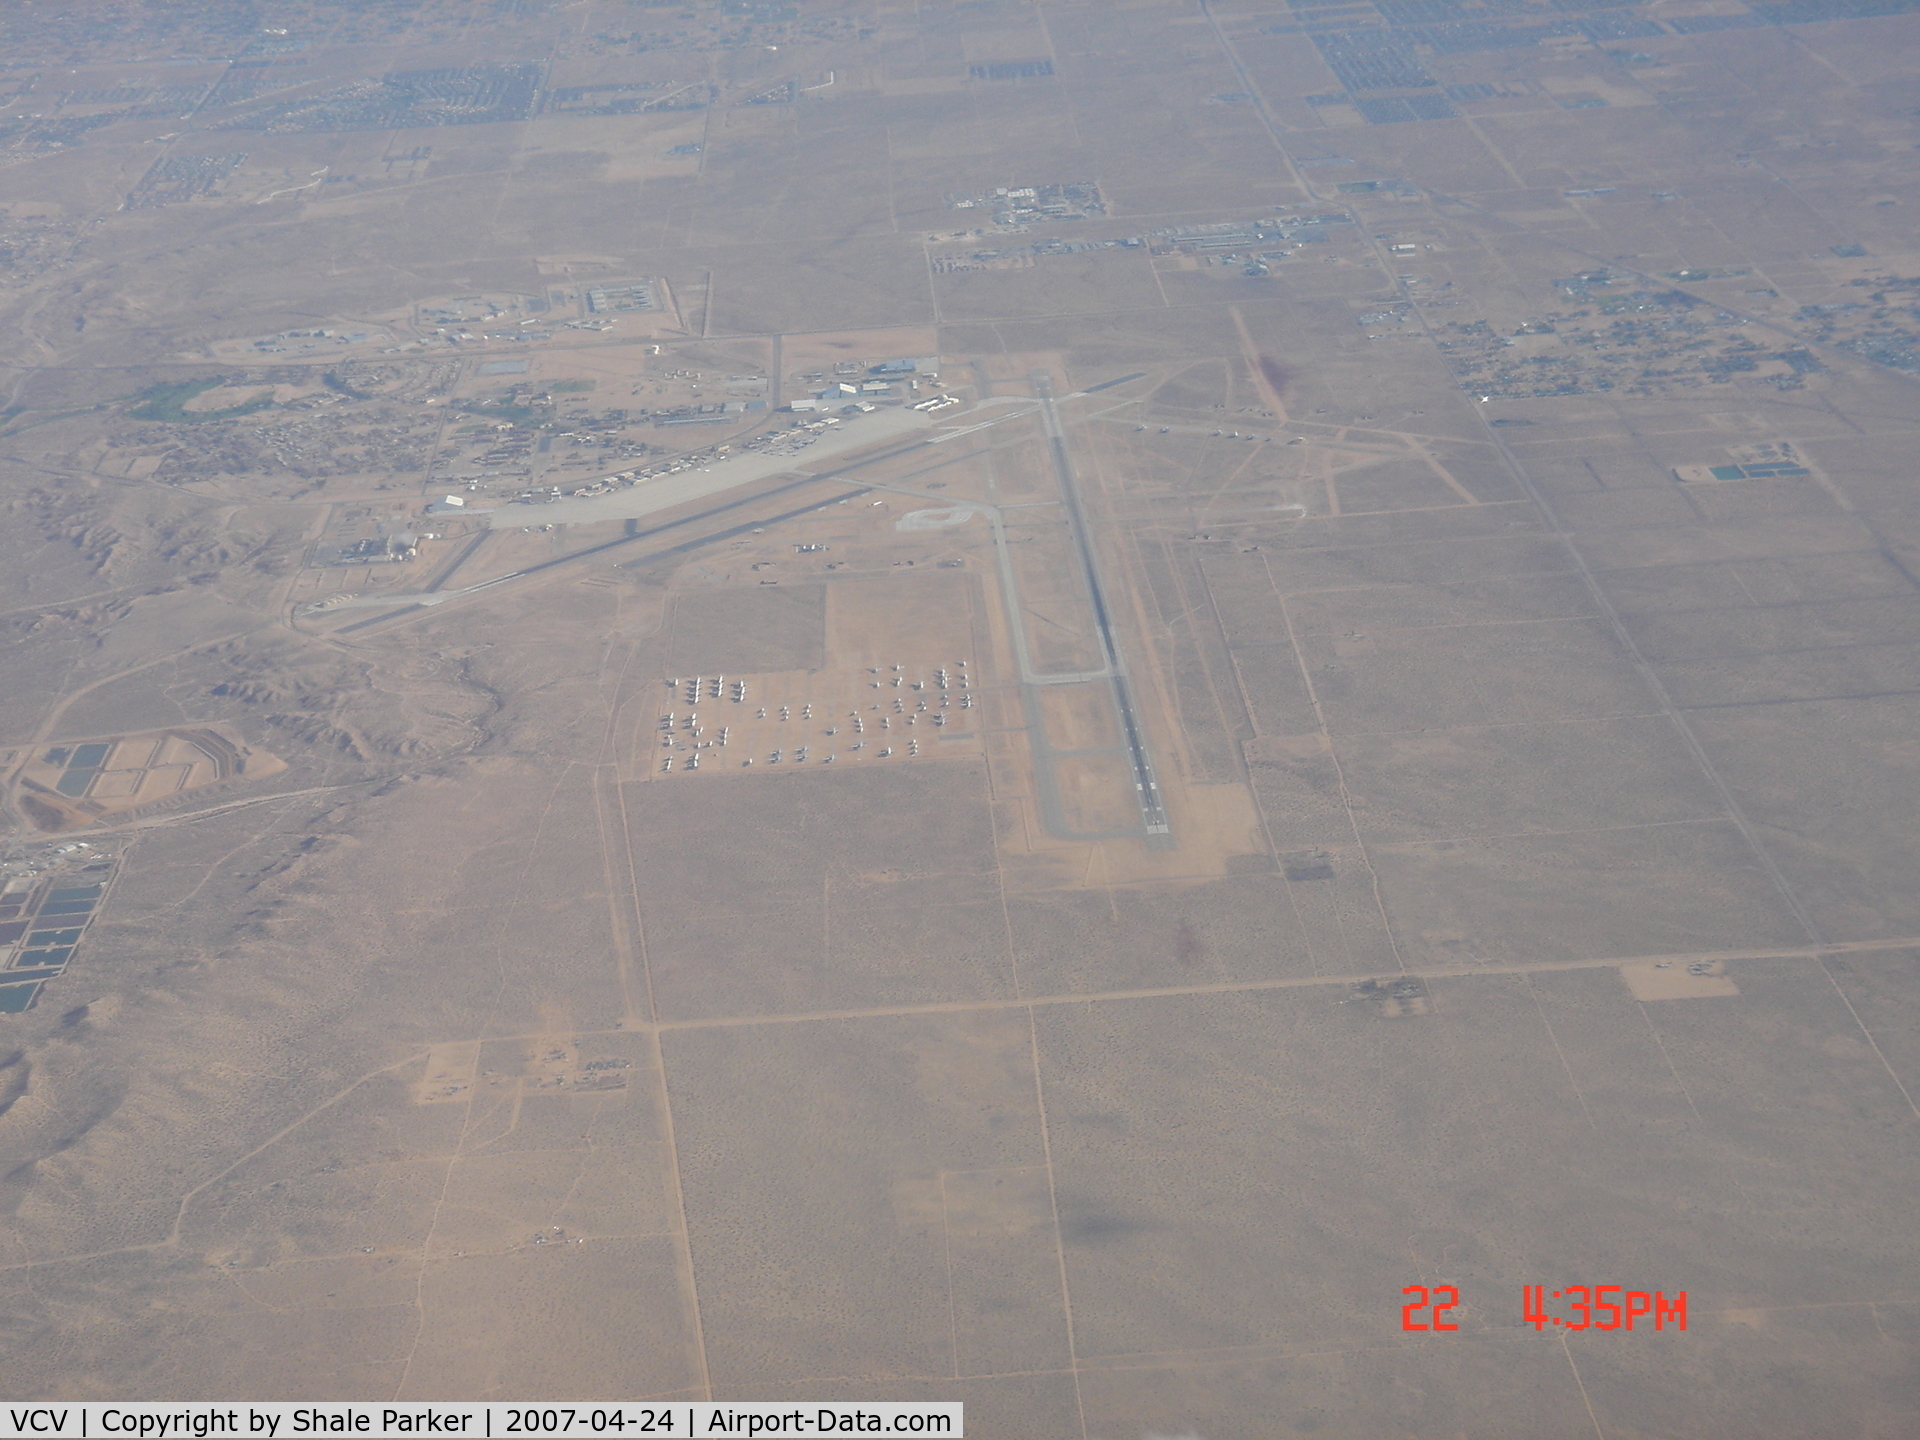 Southern California Logistics Airport (VCV) - Heading west @ 14,000 FT.